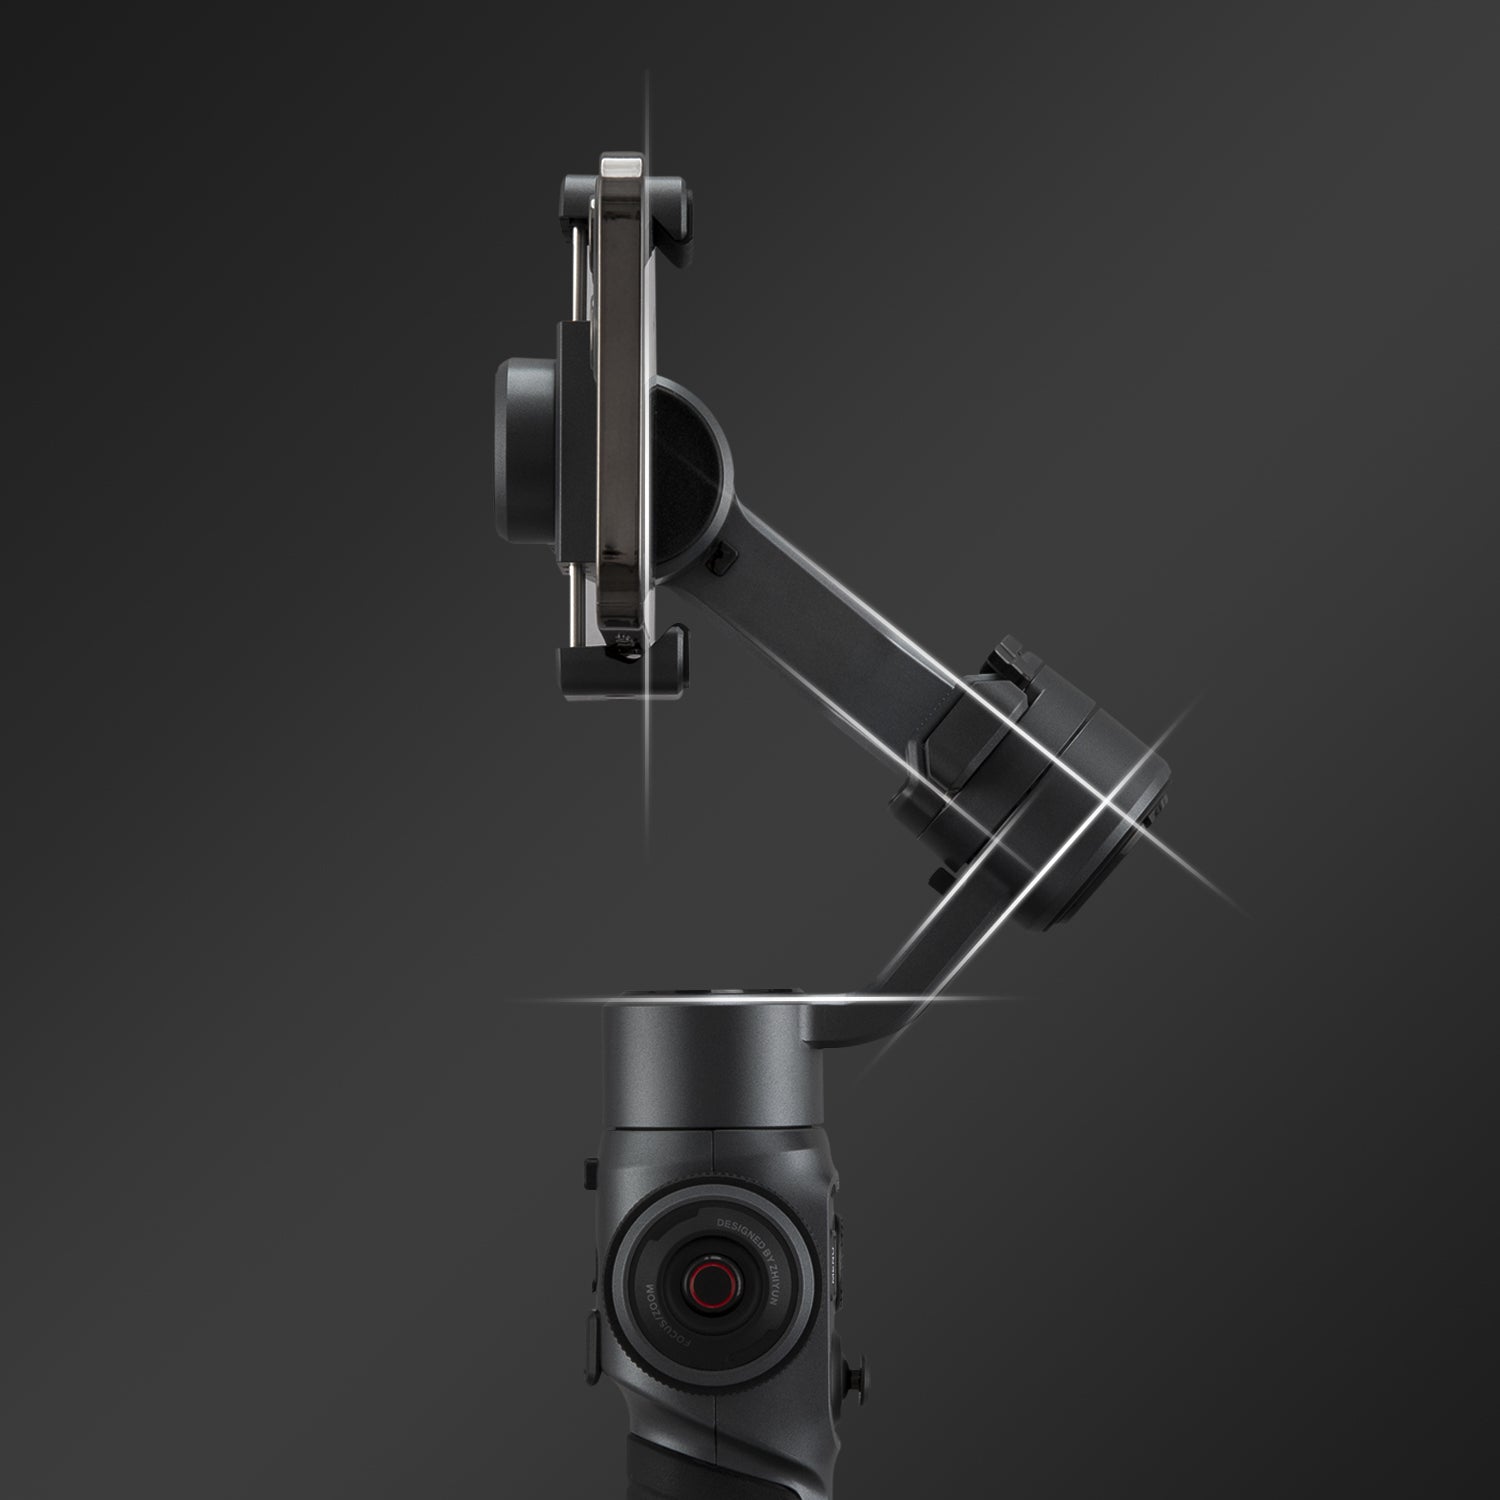 Smooth 5, being a 3-axis gimbal, gets every angle covered. Pan: 360°unlimited, Tilt: 349°, Roll: 300°